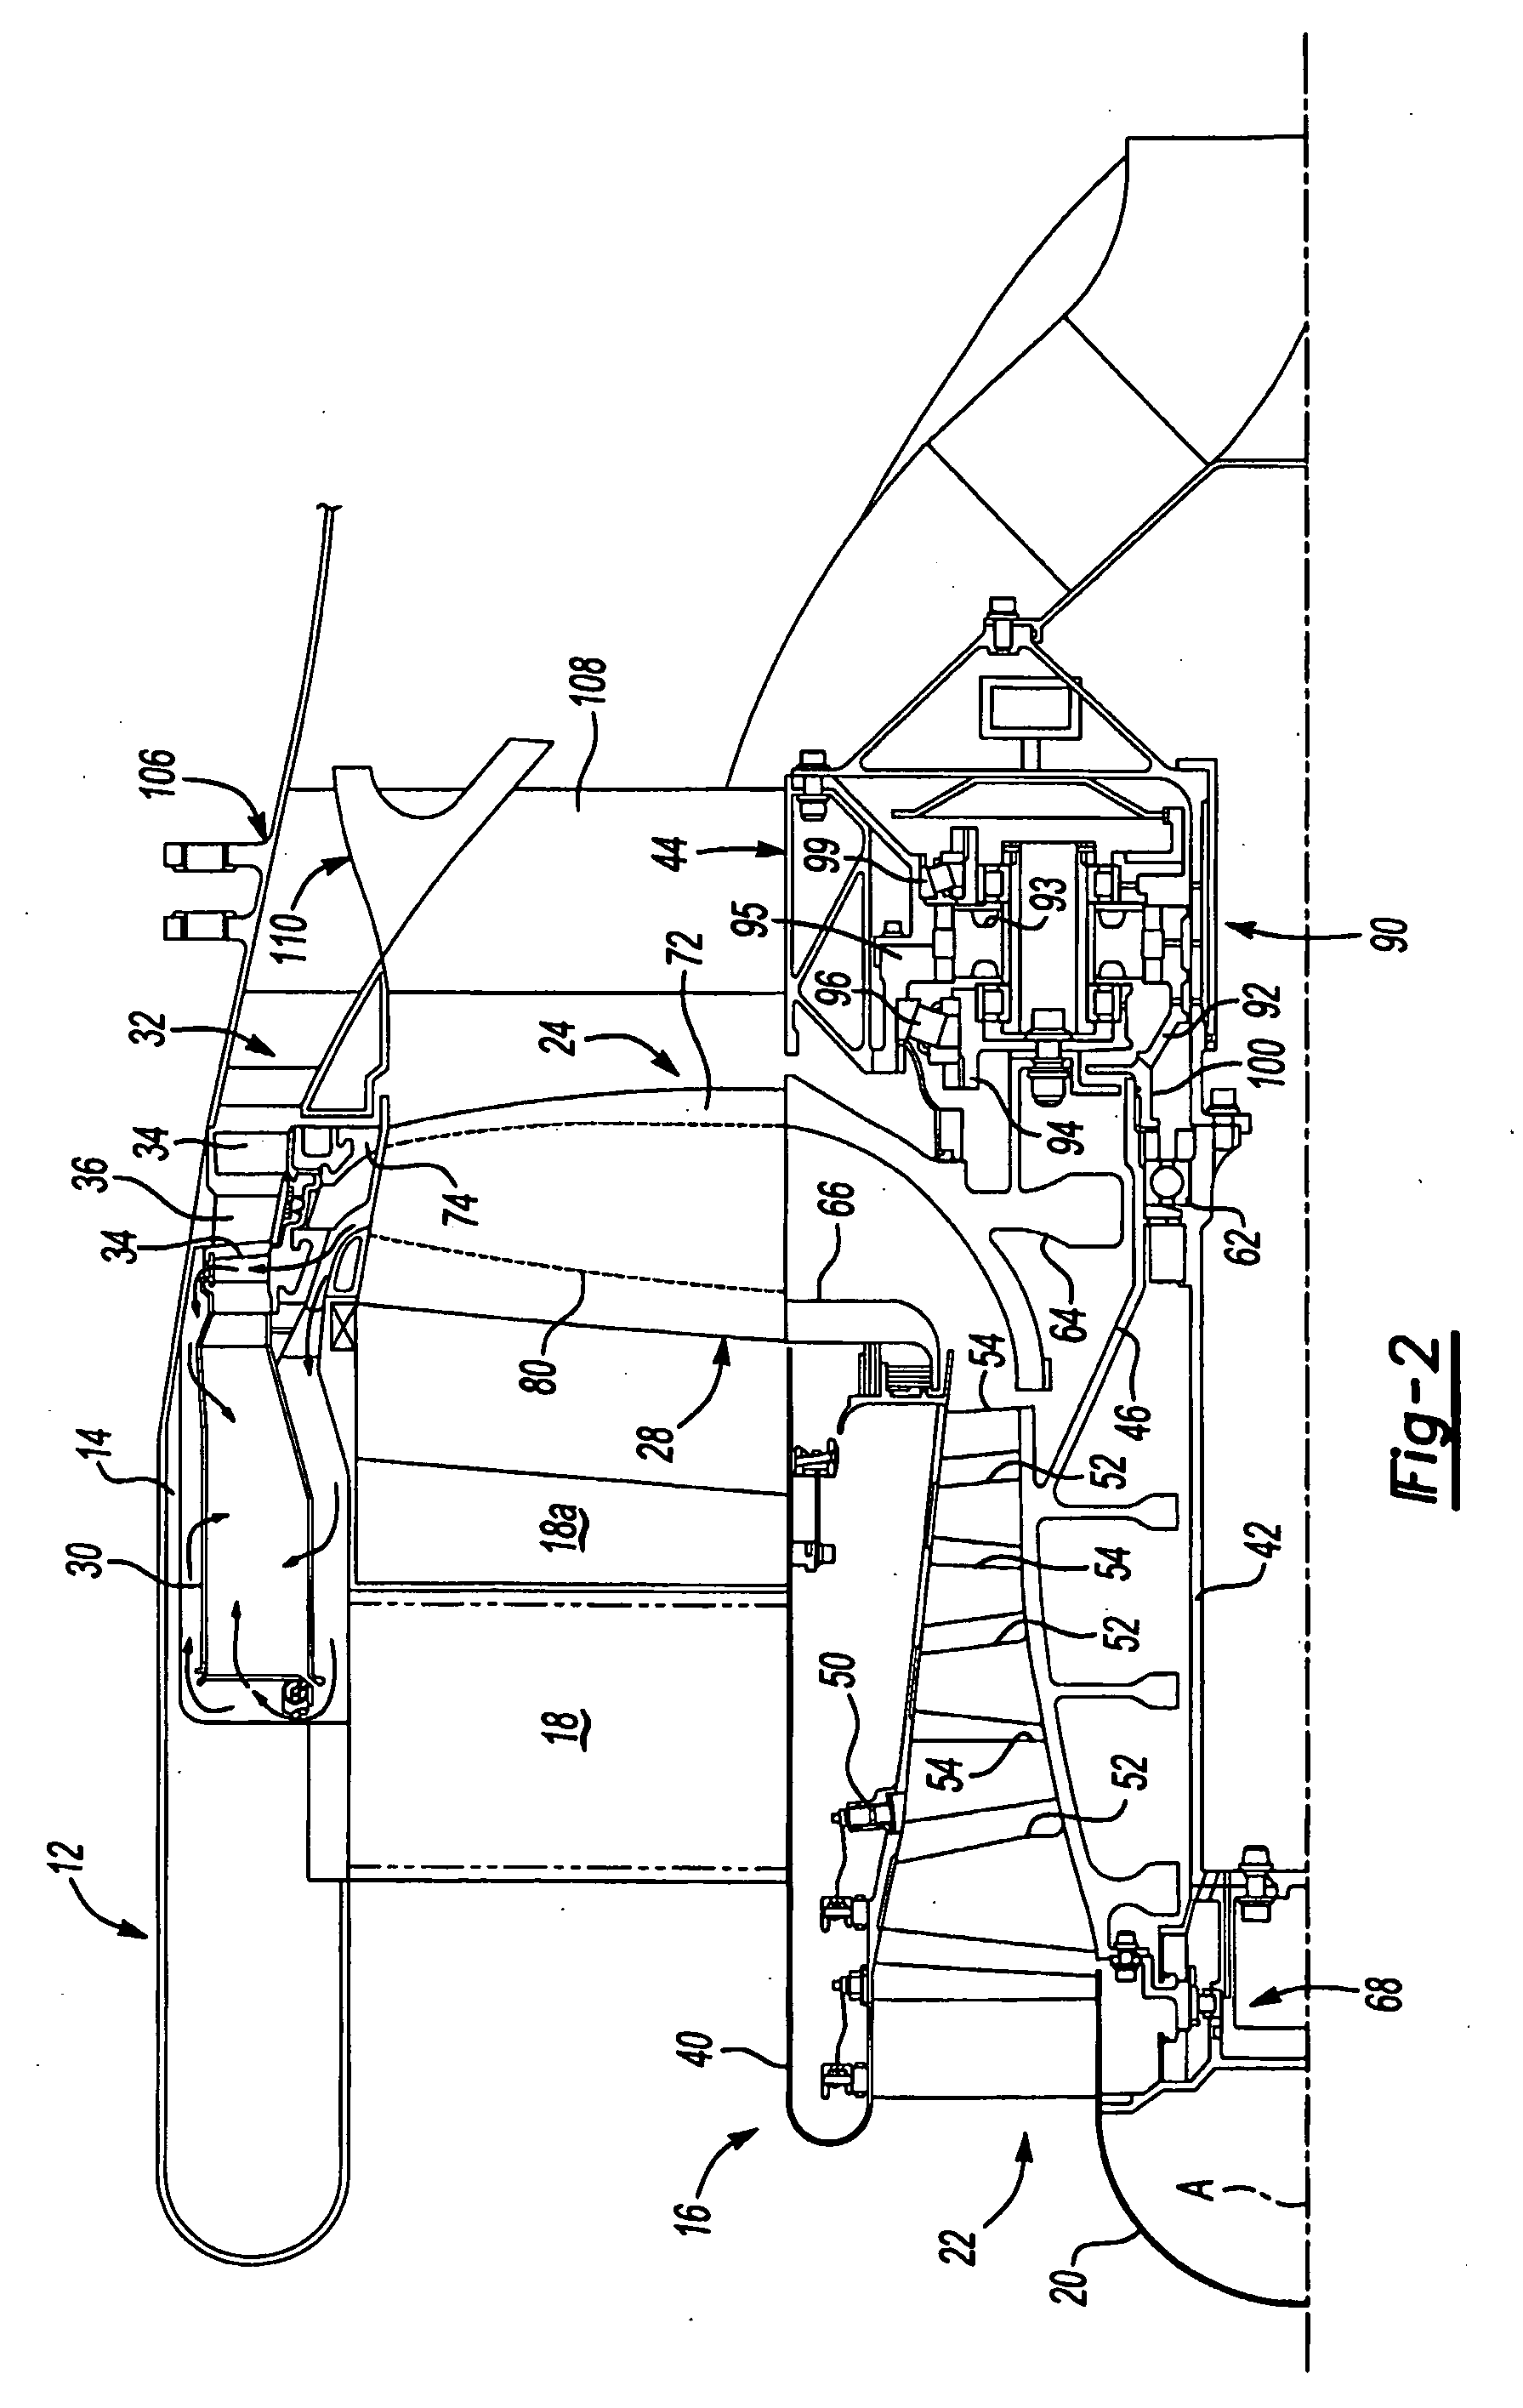 Axial compressor for tip turbine engine